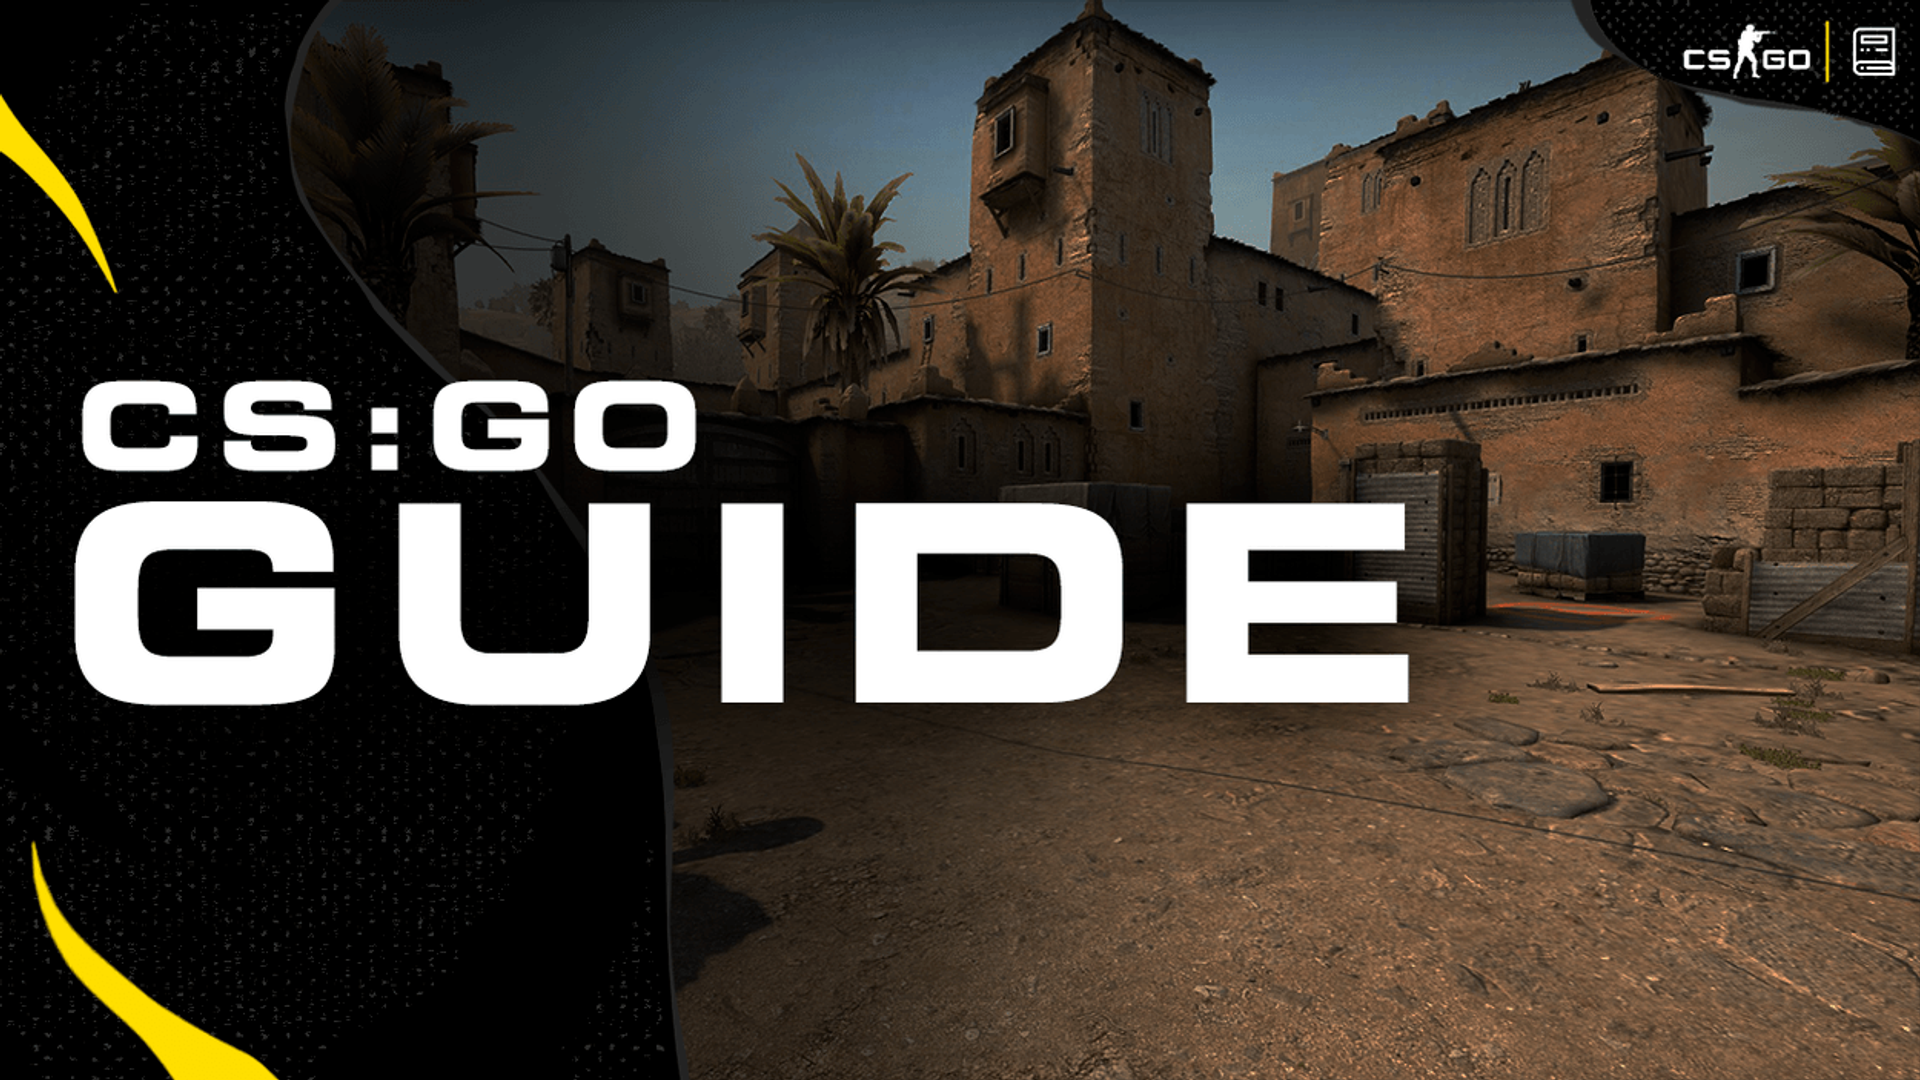 How to Show FPS in CS:GO, CS:GO FPS Commands and More, DMarket